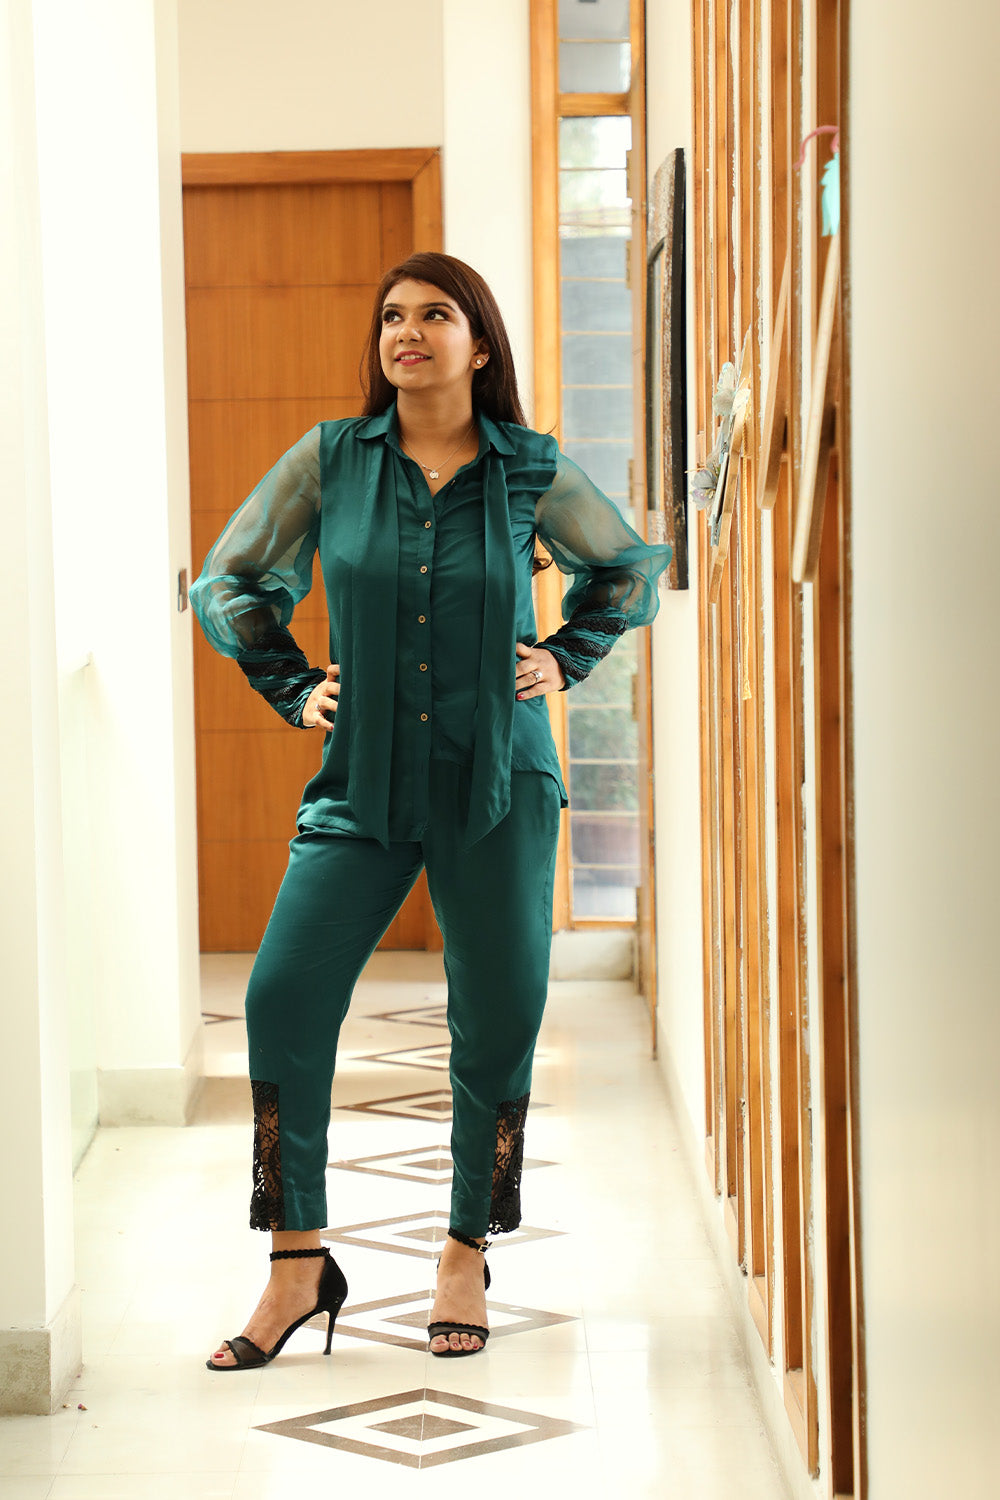 The Kiran Set Bottle Green Co-ord Set  Named After Kiran Bedi, The First Woman Officer in Ips and Also the First Woman Who Was Appointed as the Un Civil Police Advisor